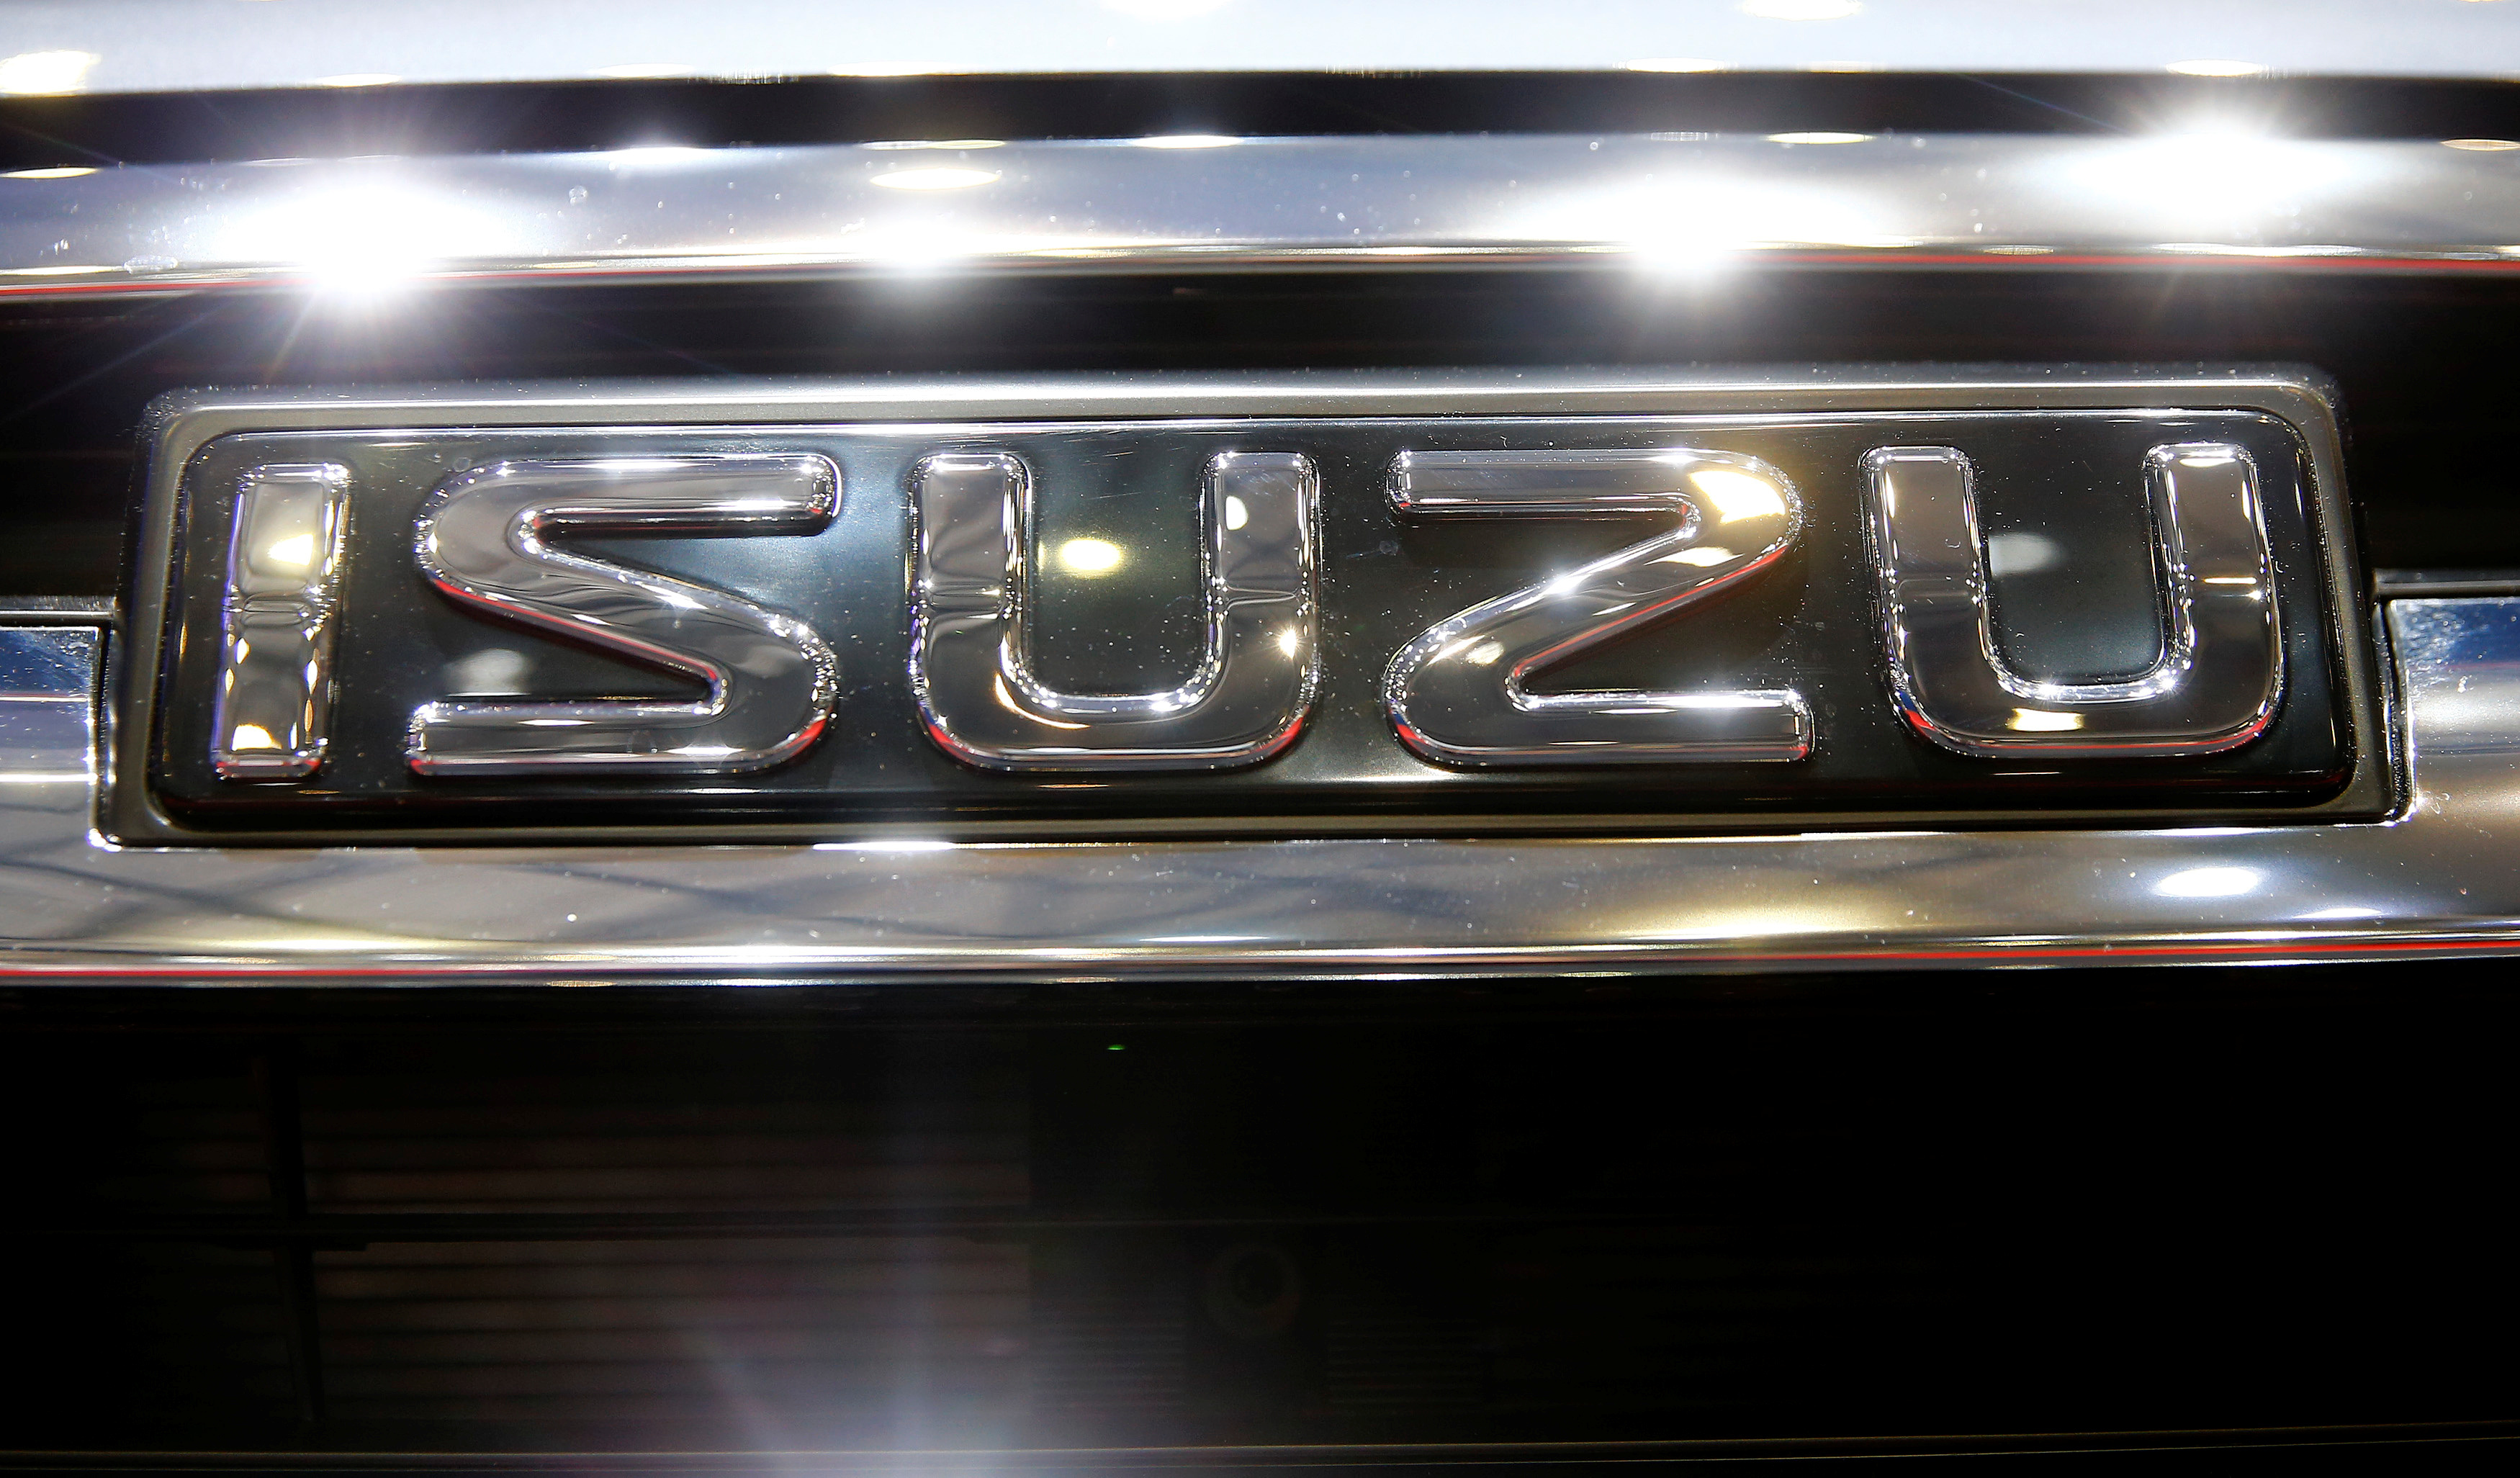 The logo of Isuzu is seen during the 87th International Motor Show at Palexpo in Geneva